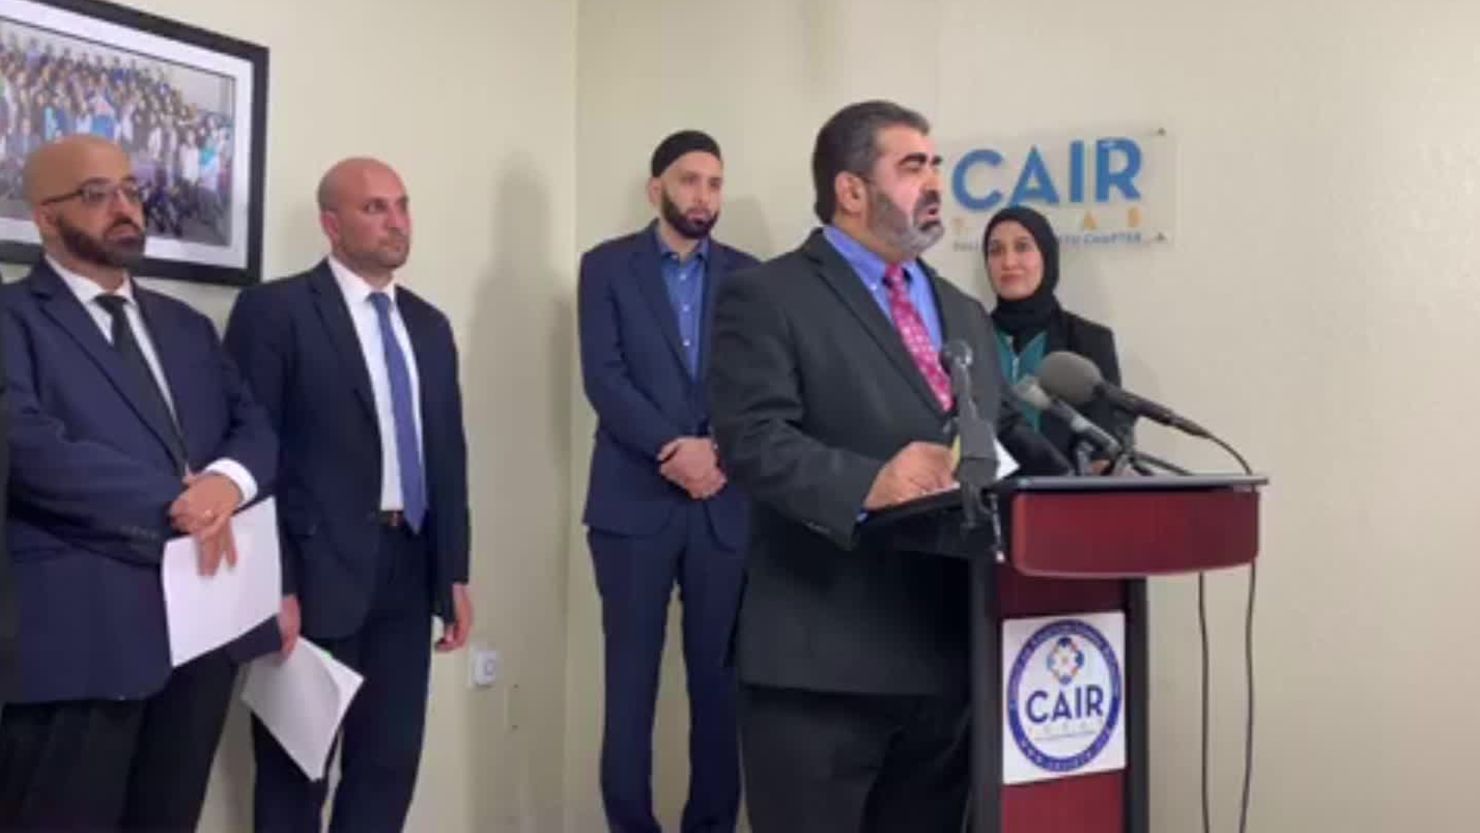 Abderraoof Alkhawaldeh addresses reporters at a CAIR press conference on Thursday after he said his American Airlines flight was canceled due to a security concern.